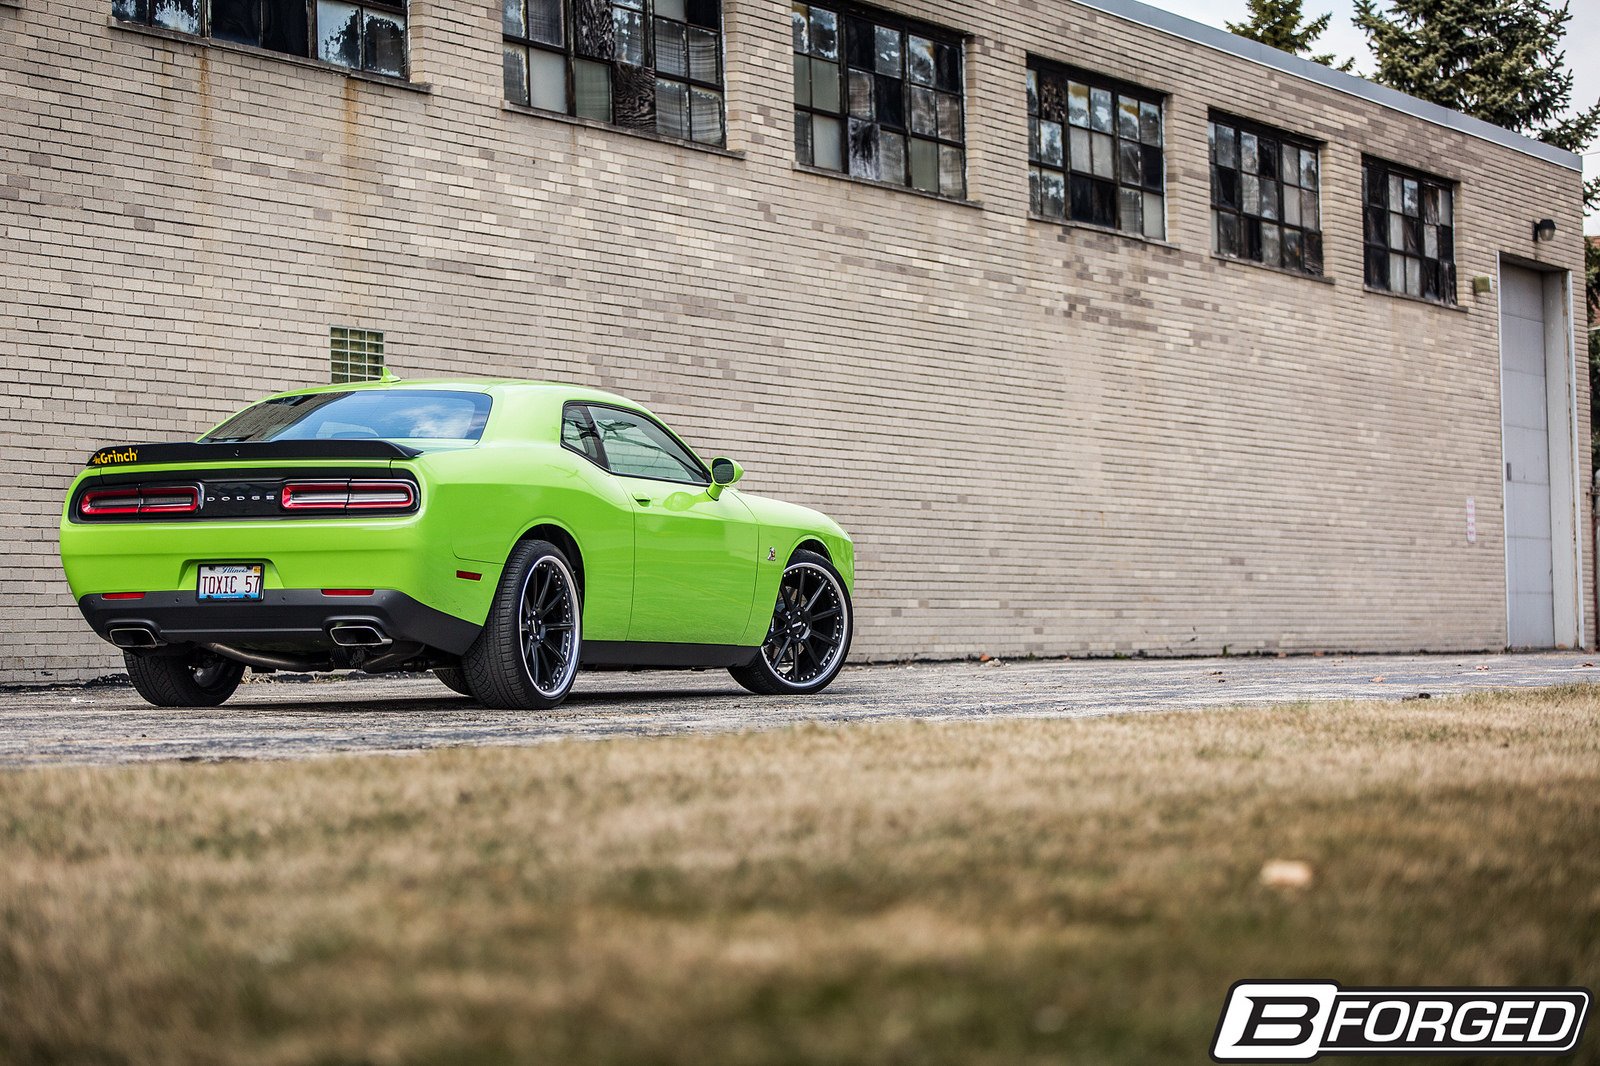 b forged, Wheel, Dodge, Challenger, Cars, Green Wallpaper